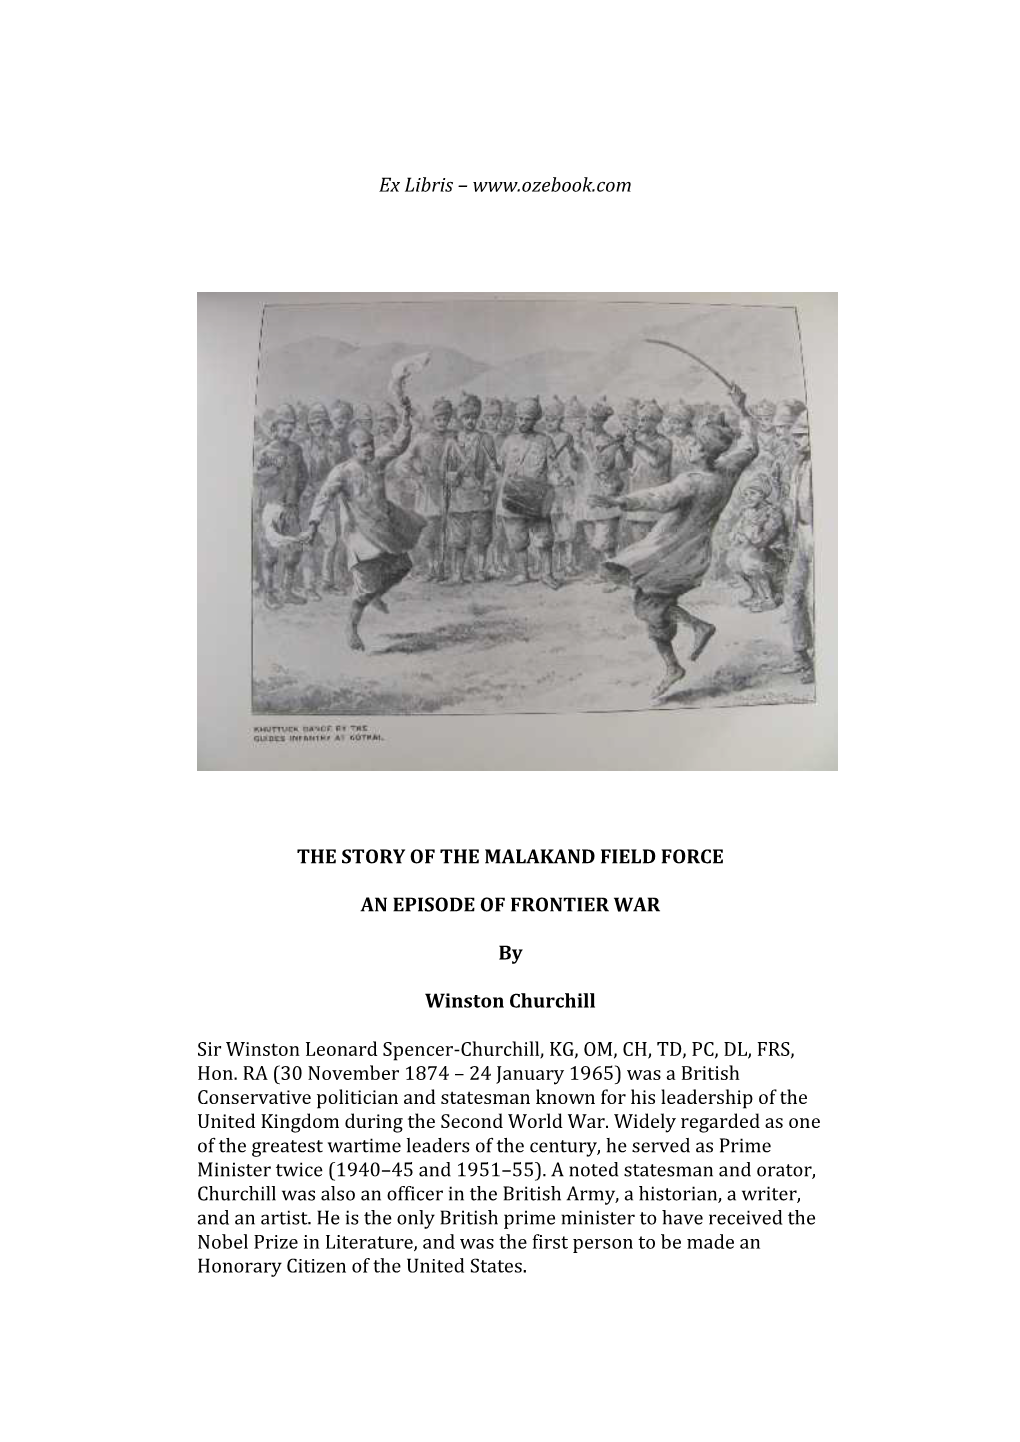 The Story of the Malakand Field Force, by Sir Winston S. Churchill